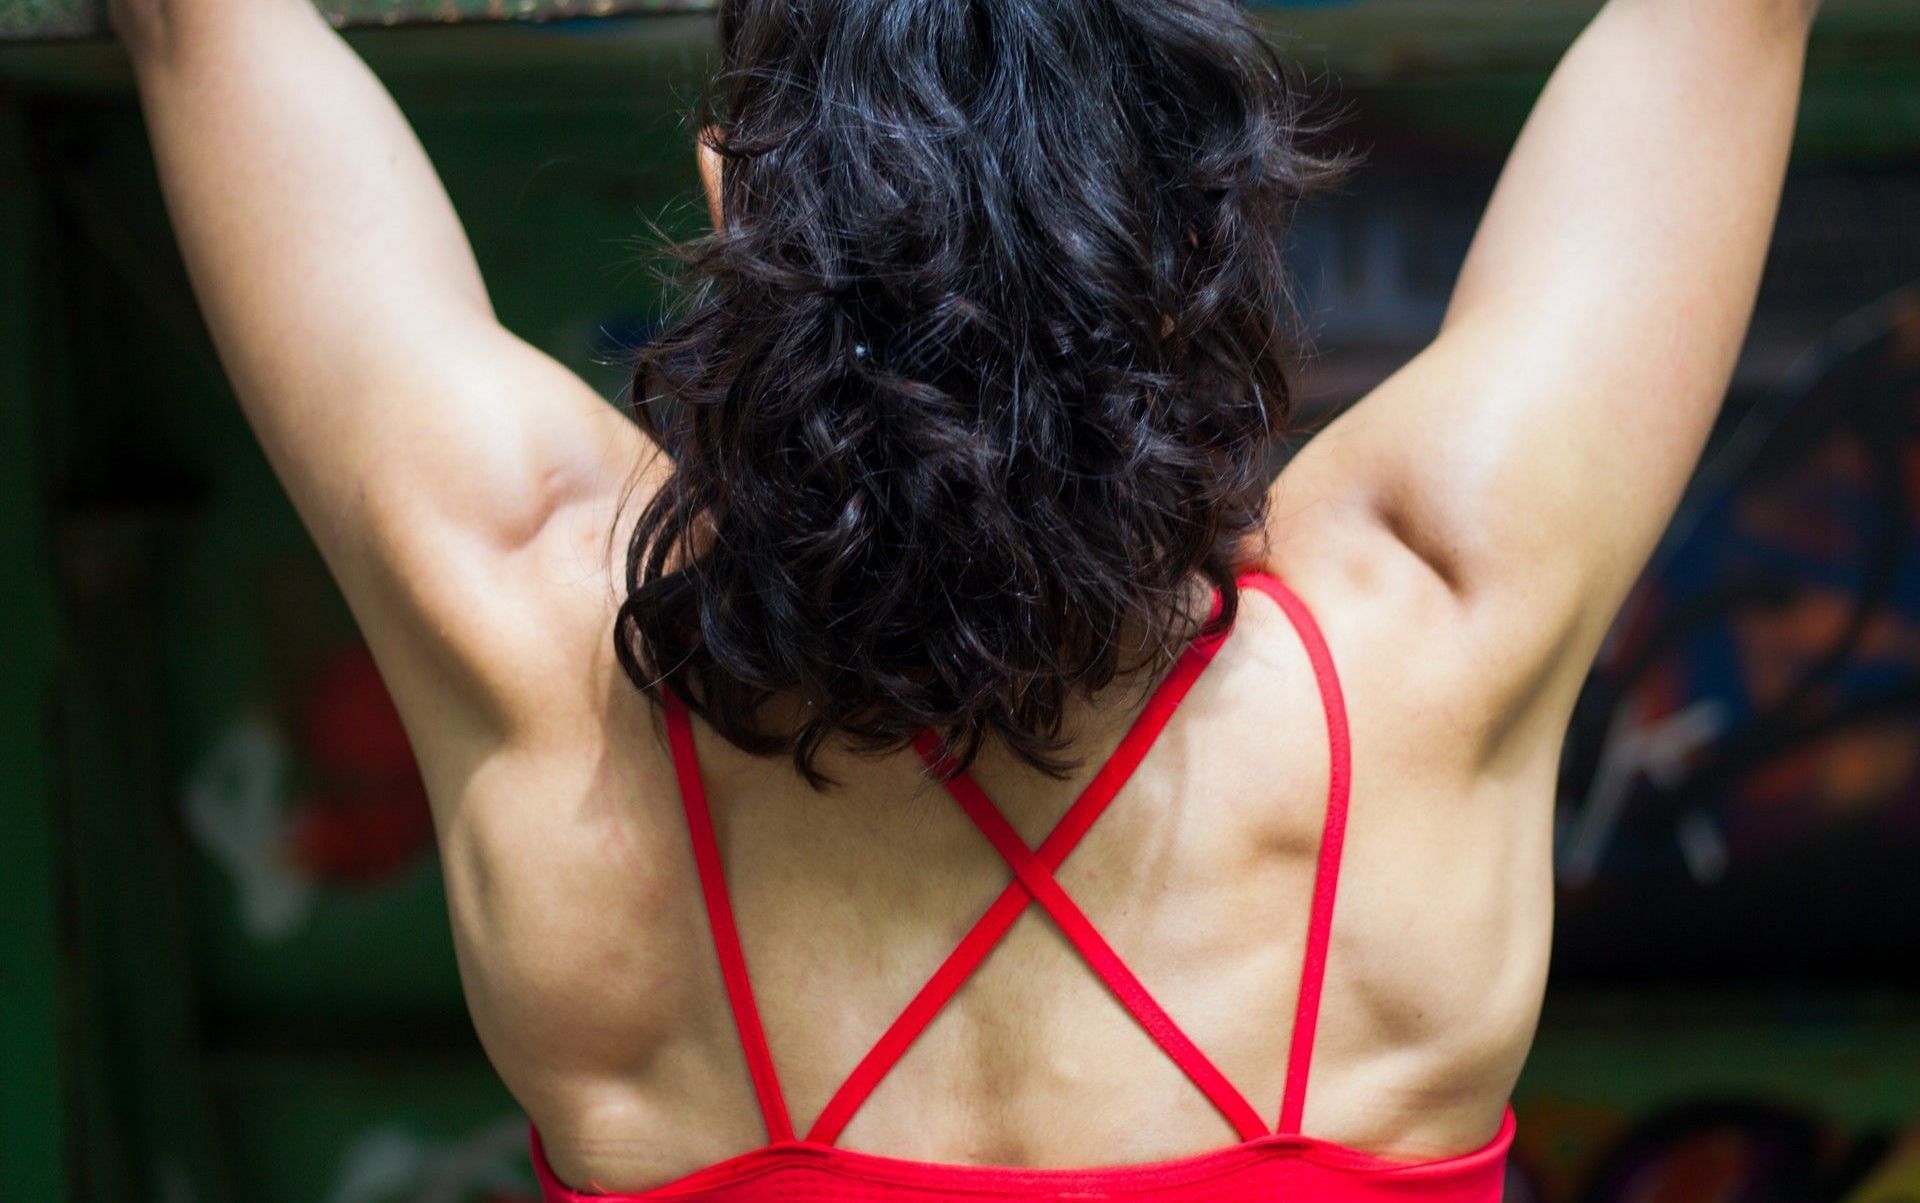 Guide to pull-up exercises (Image via Pexels/Photo by Rainer Eck)